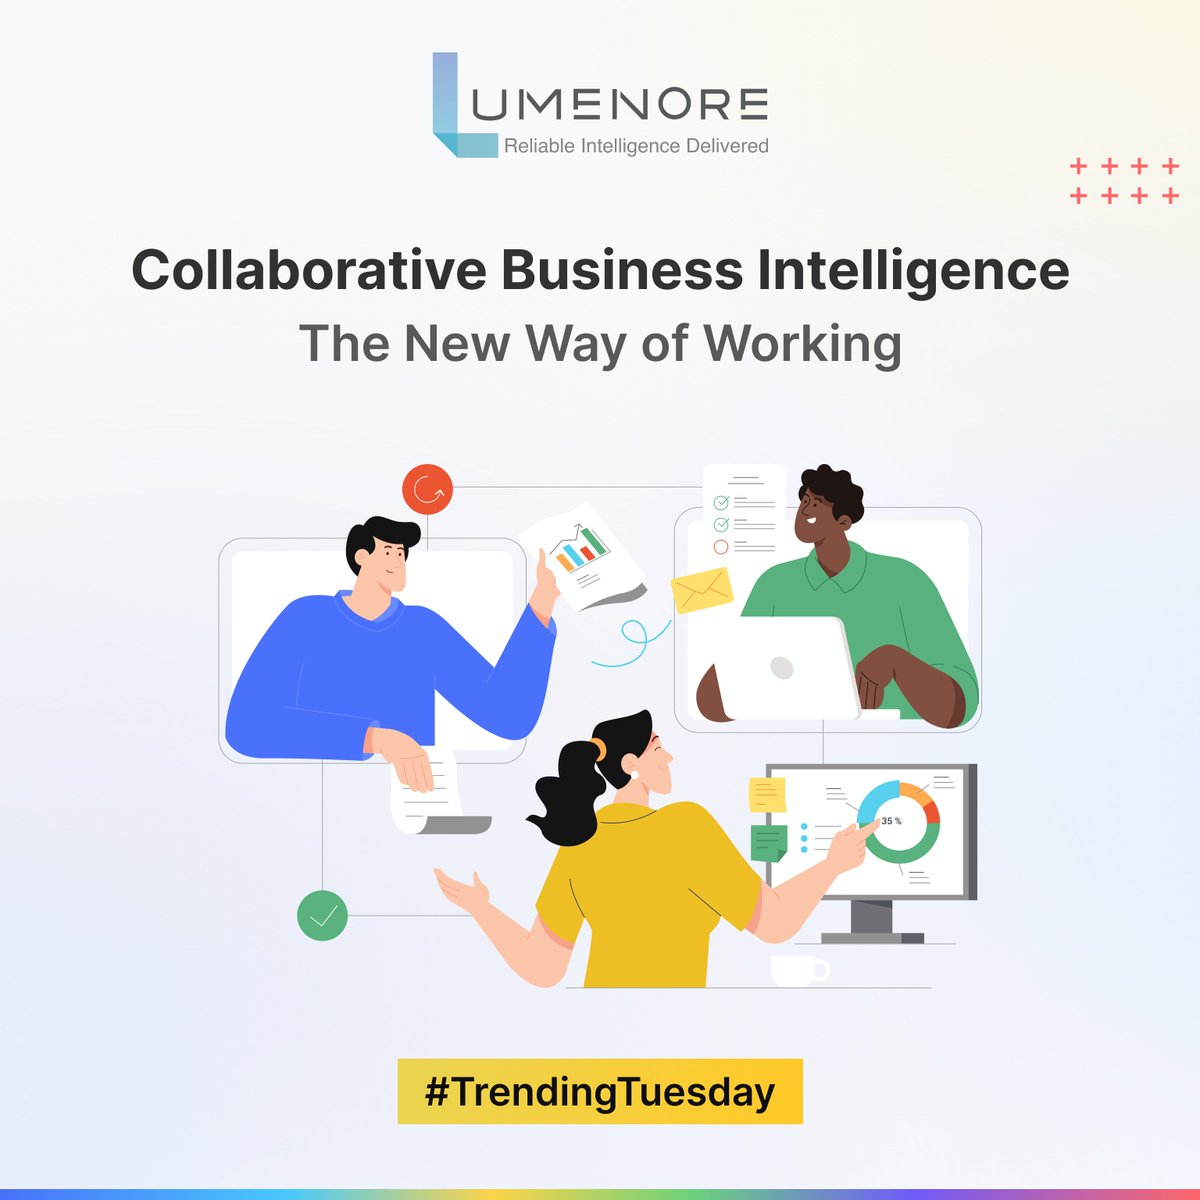 Collaborative BI: the new way of working in 2023! With online BI tools and collaboration tools such as social media, businesses can enhance decision-making by providing automated reports, BI alerts, and public or embedded dashboards. Let's explore this trend in 2023!#Tuesdaytrend